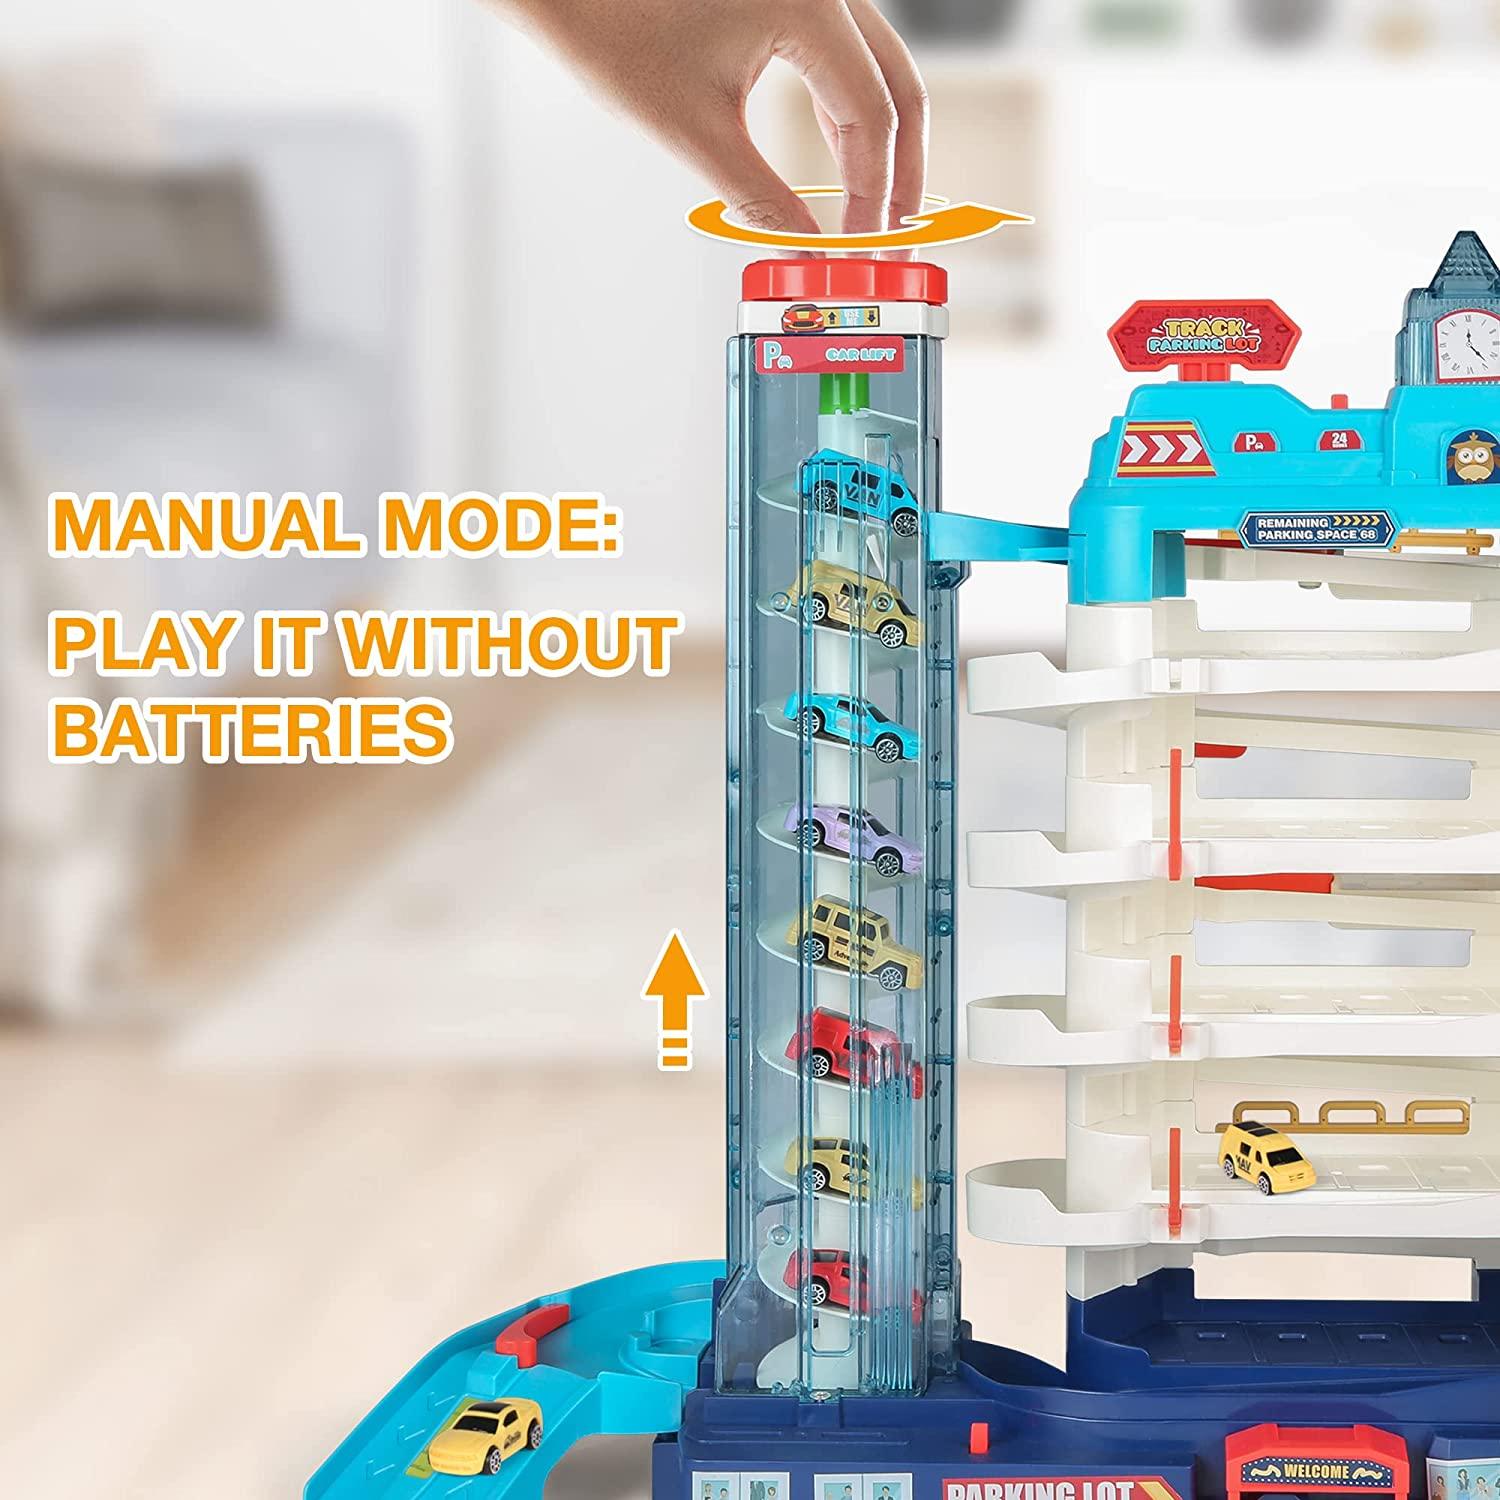 5-Level Parking Garage Toy Play Set - Kids Electric & Manual Car Track Set with 8 Cars and 1 Road Map - Toddlers Parking Lot Toys for 3+ Years Old - Bosonshop